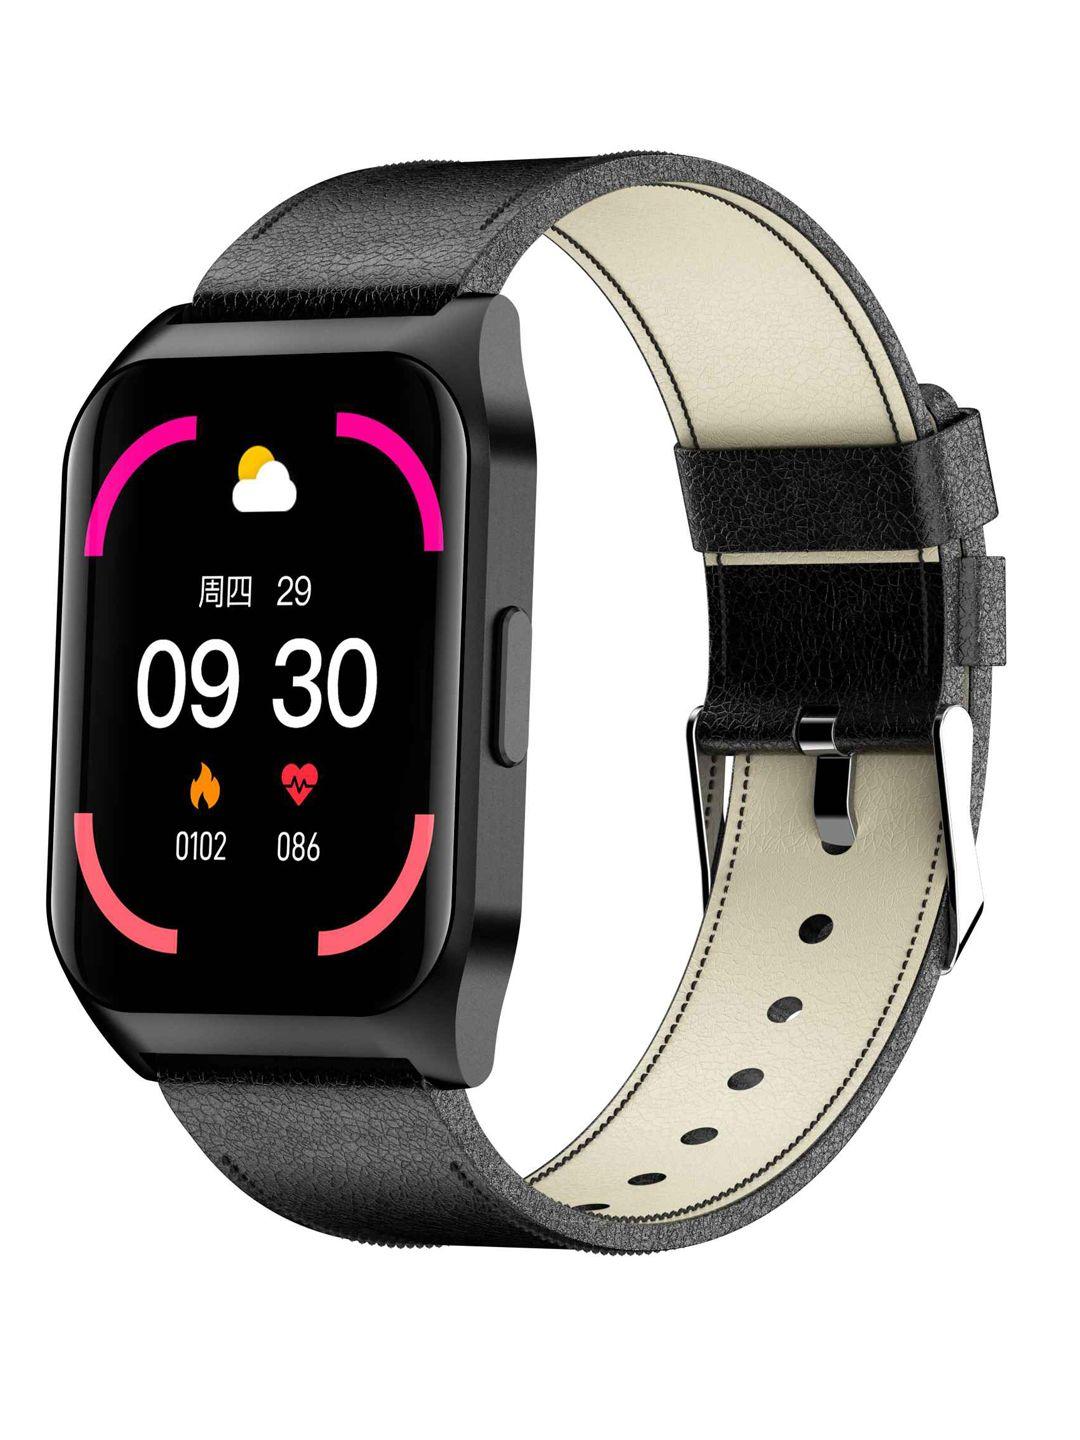 french connection unisex black solid e17-b full touch bluetooth smart watches